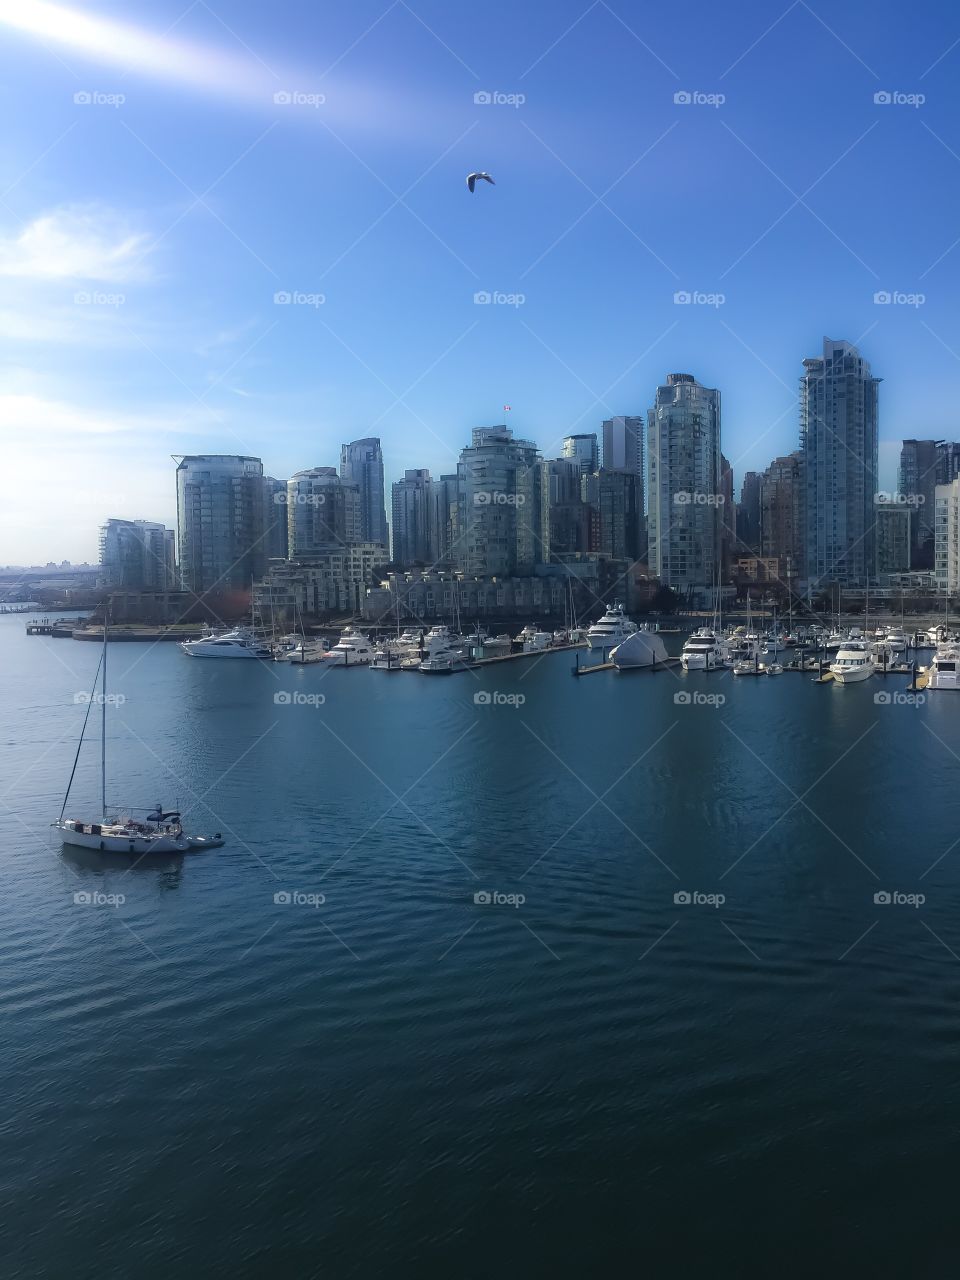 Vancouver, British Columbia on a beautiful warm spring day with decreased clarity filter